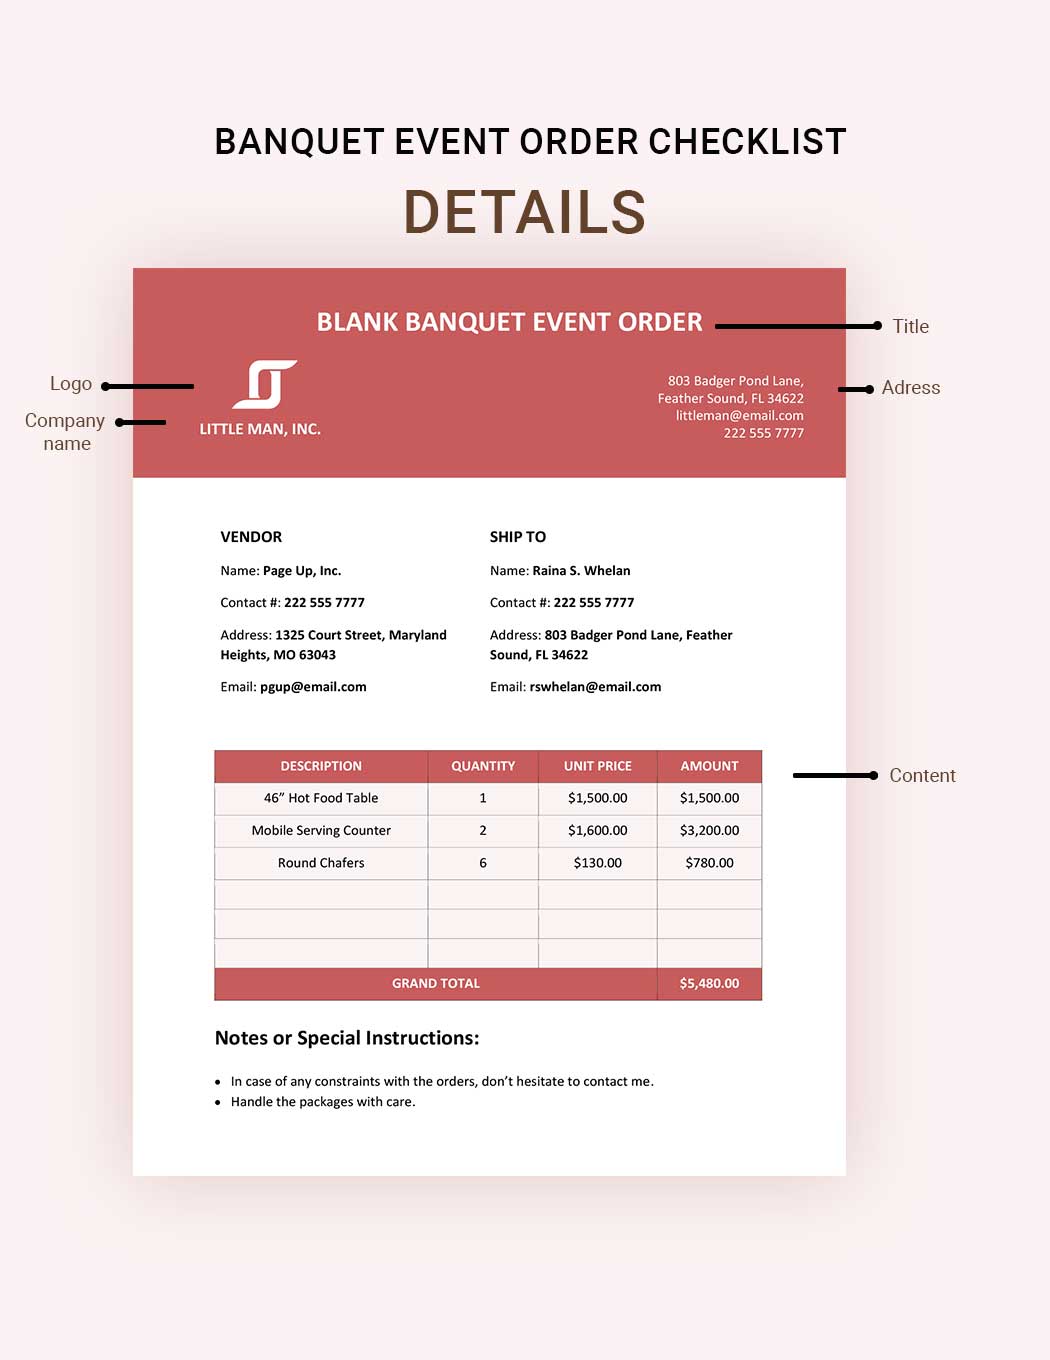 Blank Banquet Event Order Template